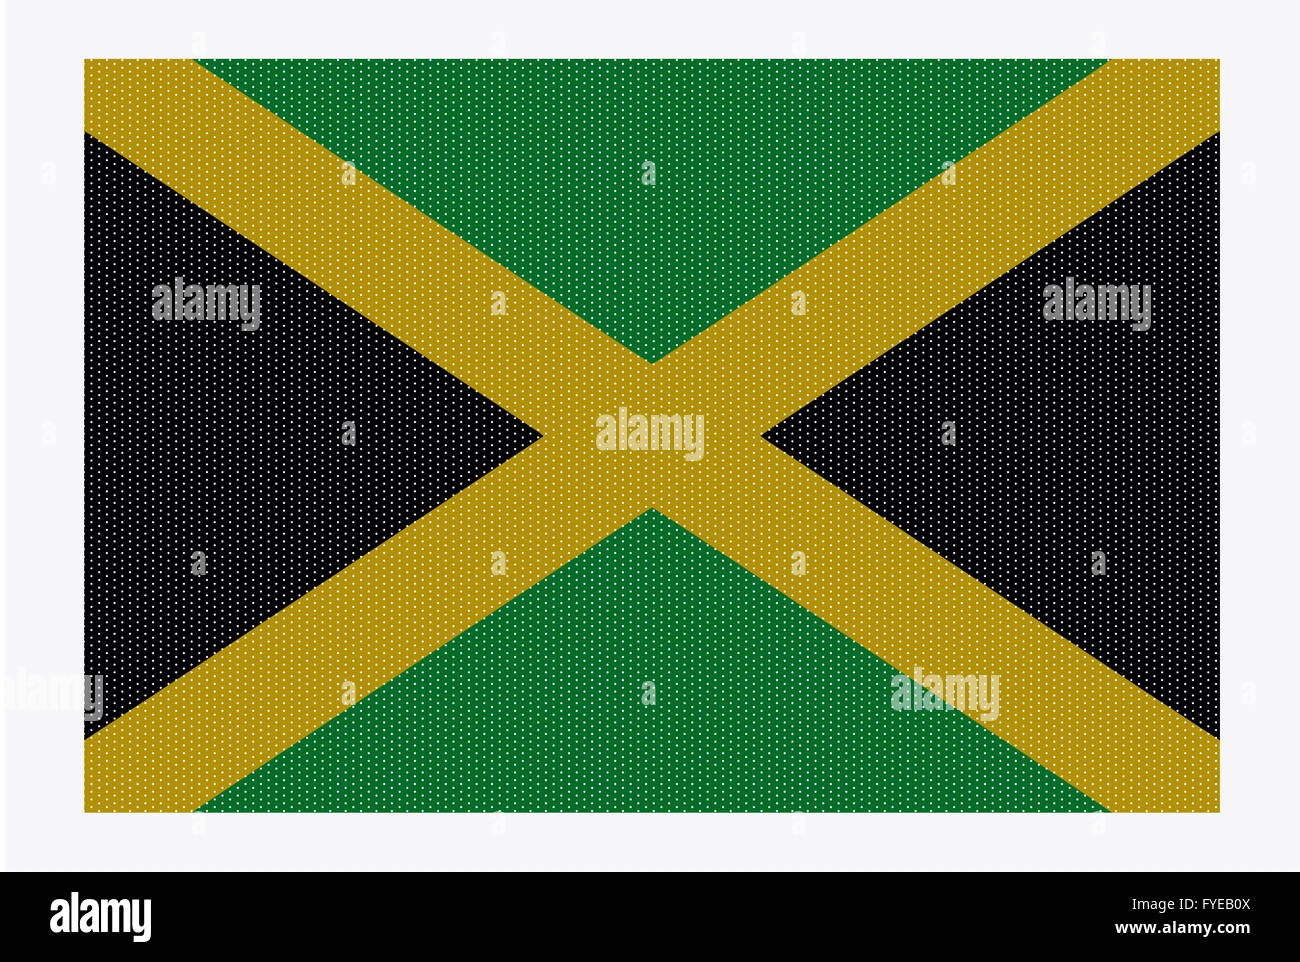 A retro looking Jamaica flag isolated on a white background Stock Photo